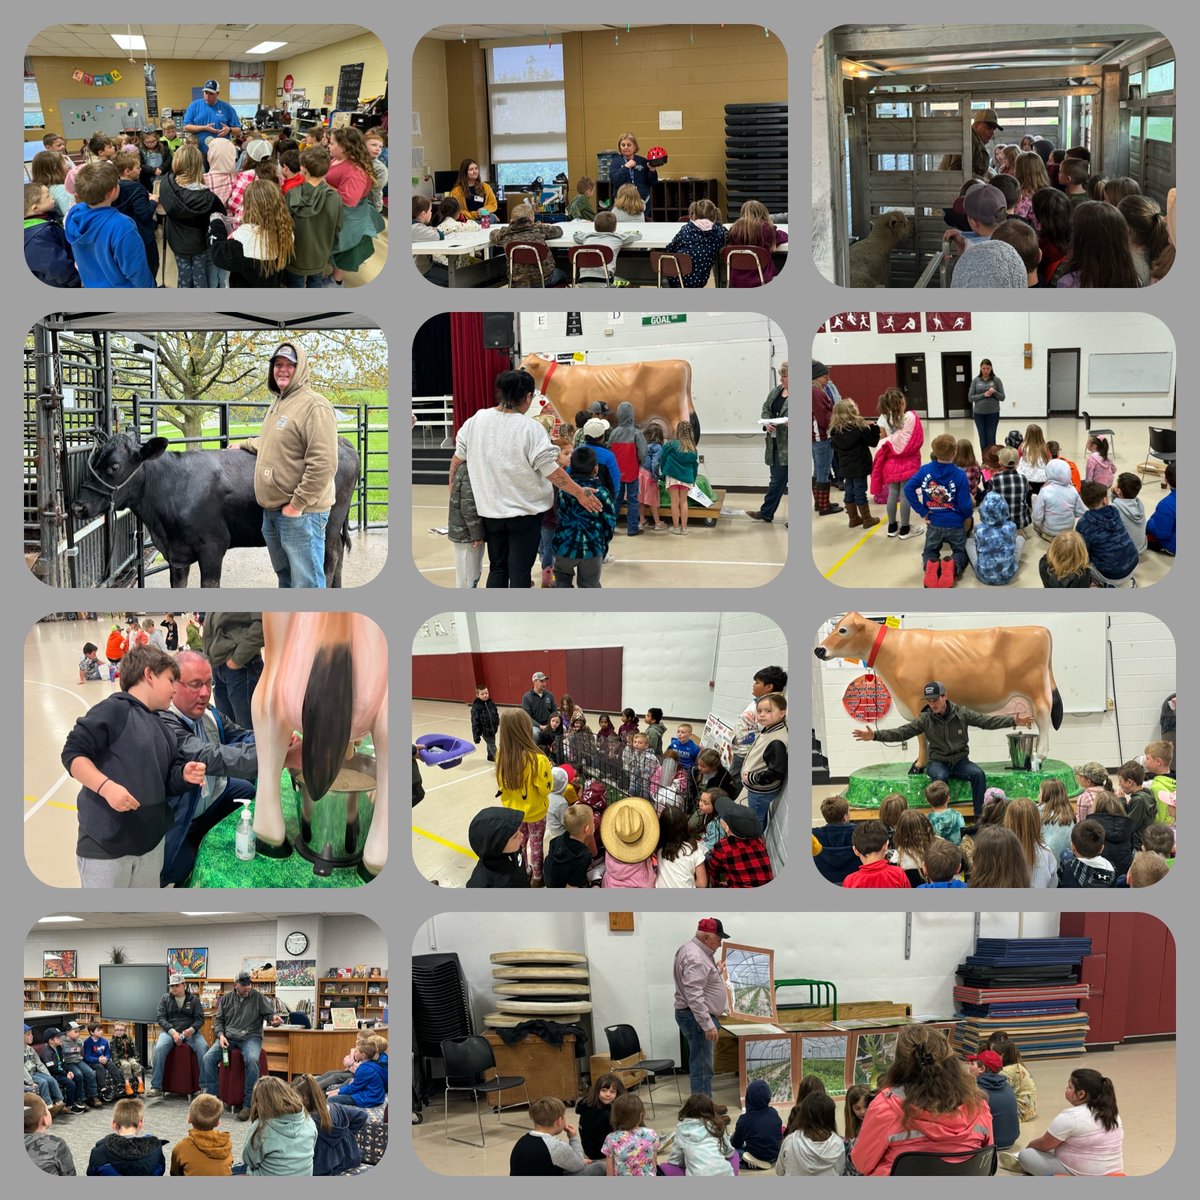 Ag Day at OCES was amazing on Friday! Thank you to all of our community partners for making it happen for our students. I even jumped in on the fun and had a student teach me how to milk the cow simulator. #WEareOC #AgDay #LearningIsFun